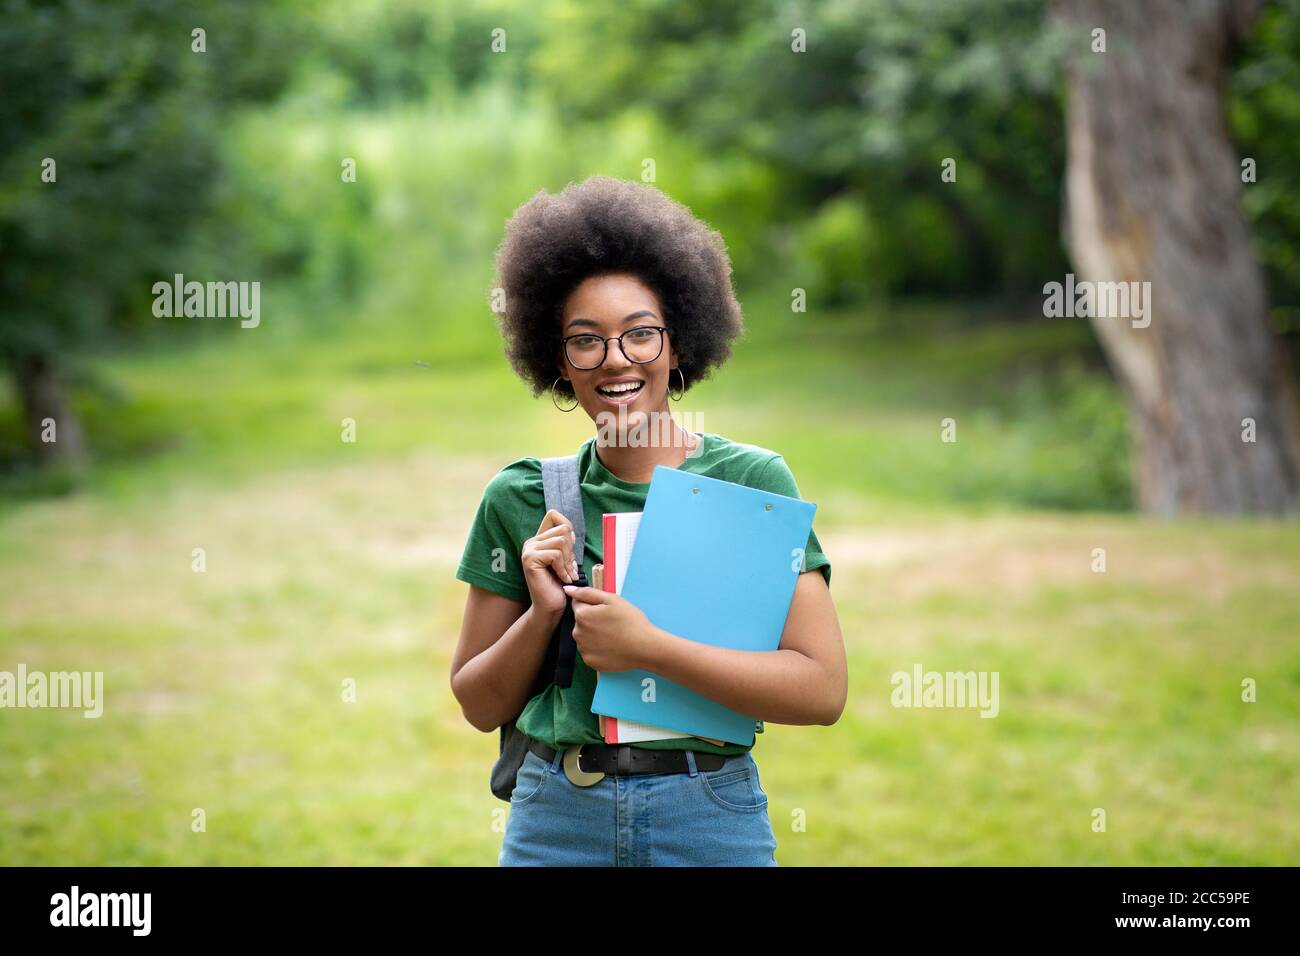 Cheerful Black Female College Student With Backpack And Workbooks Posing Outdoors Stock Photo